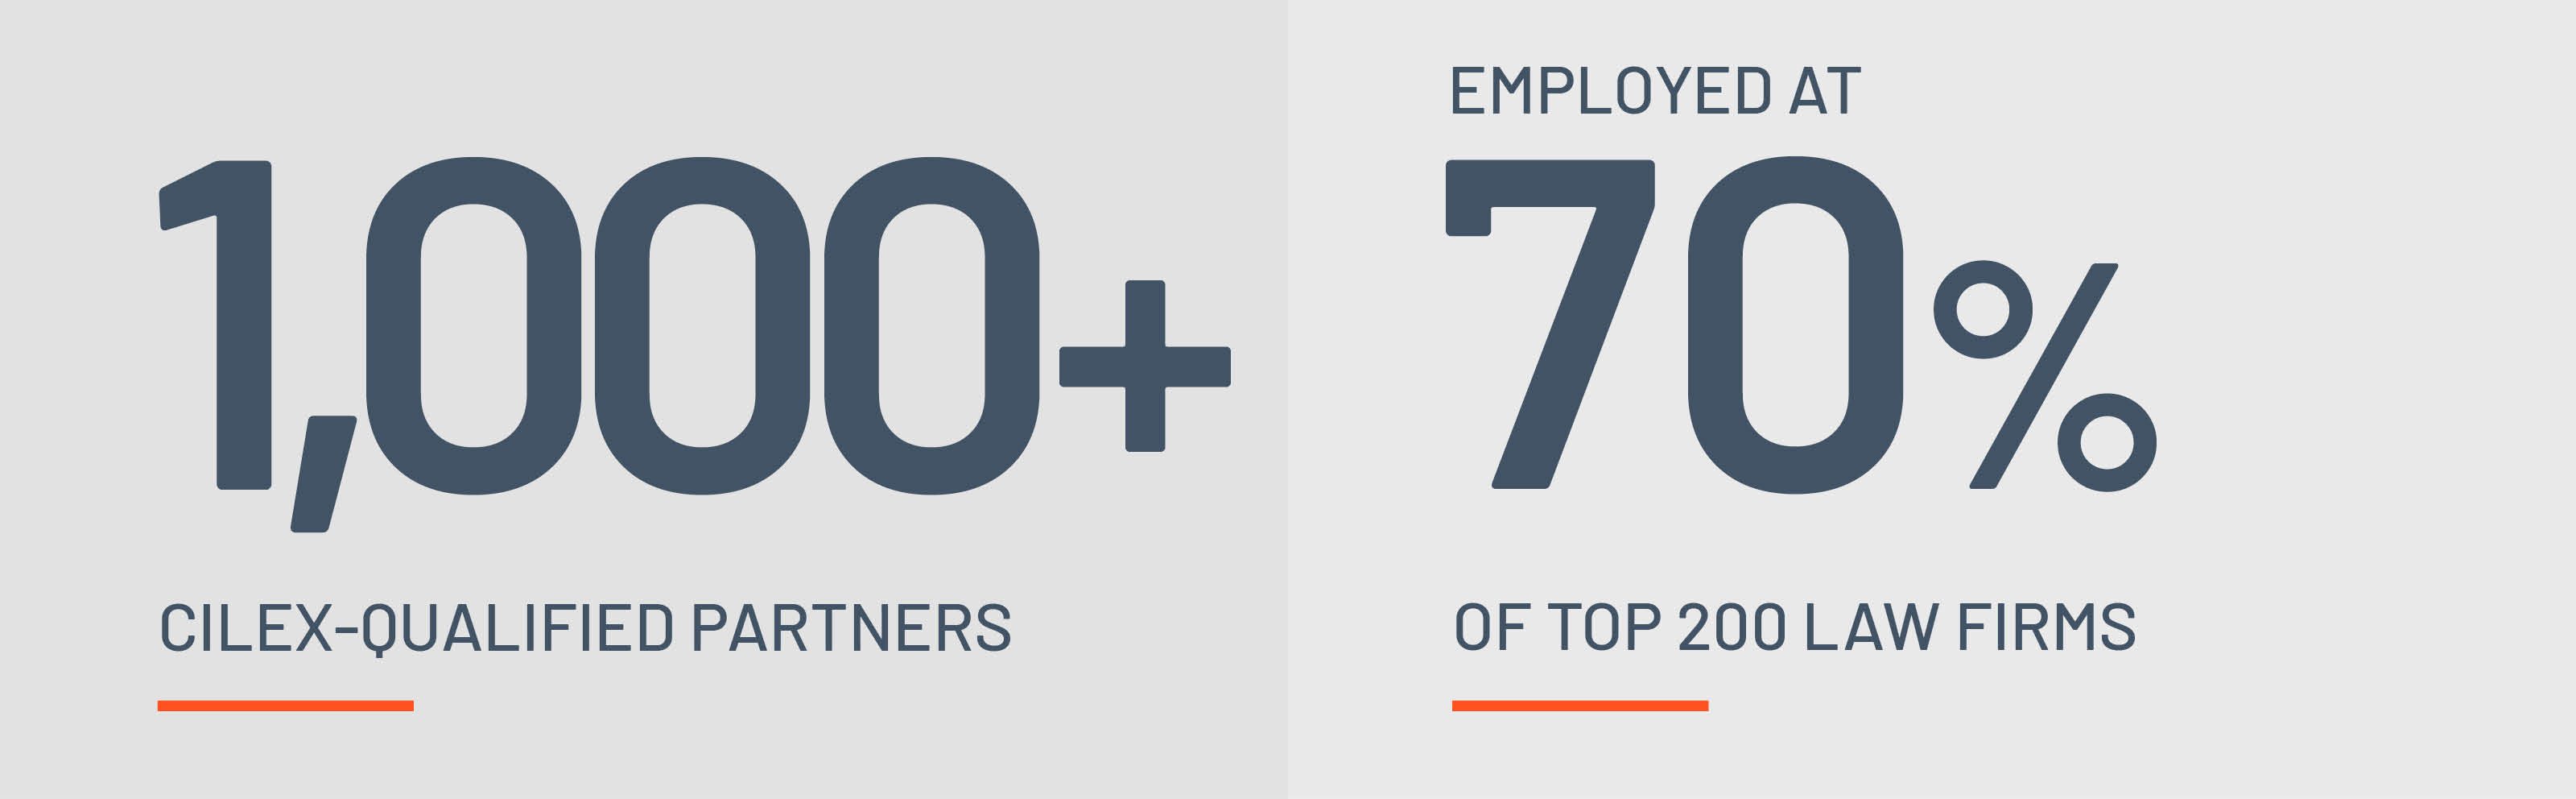 Over 1000 CILEX-qualified partners Employed at 70% of top 200 law firms.